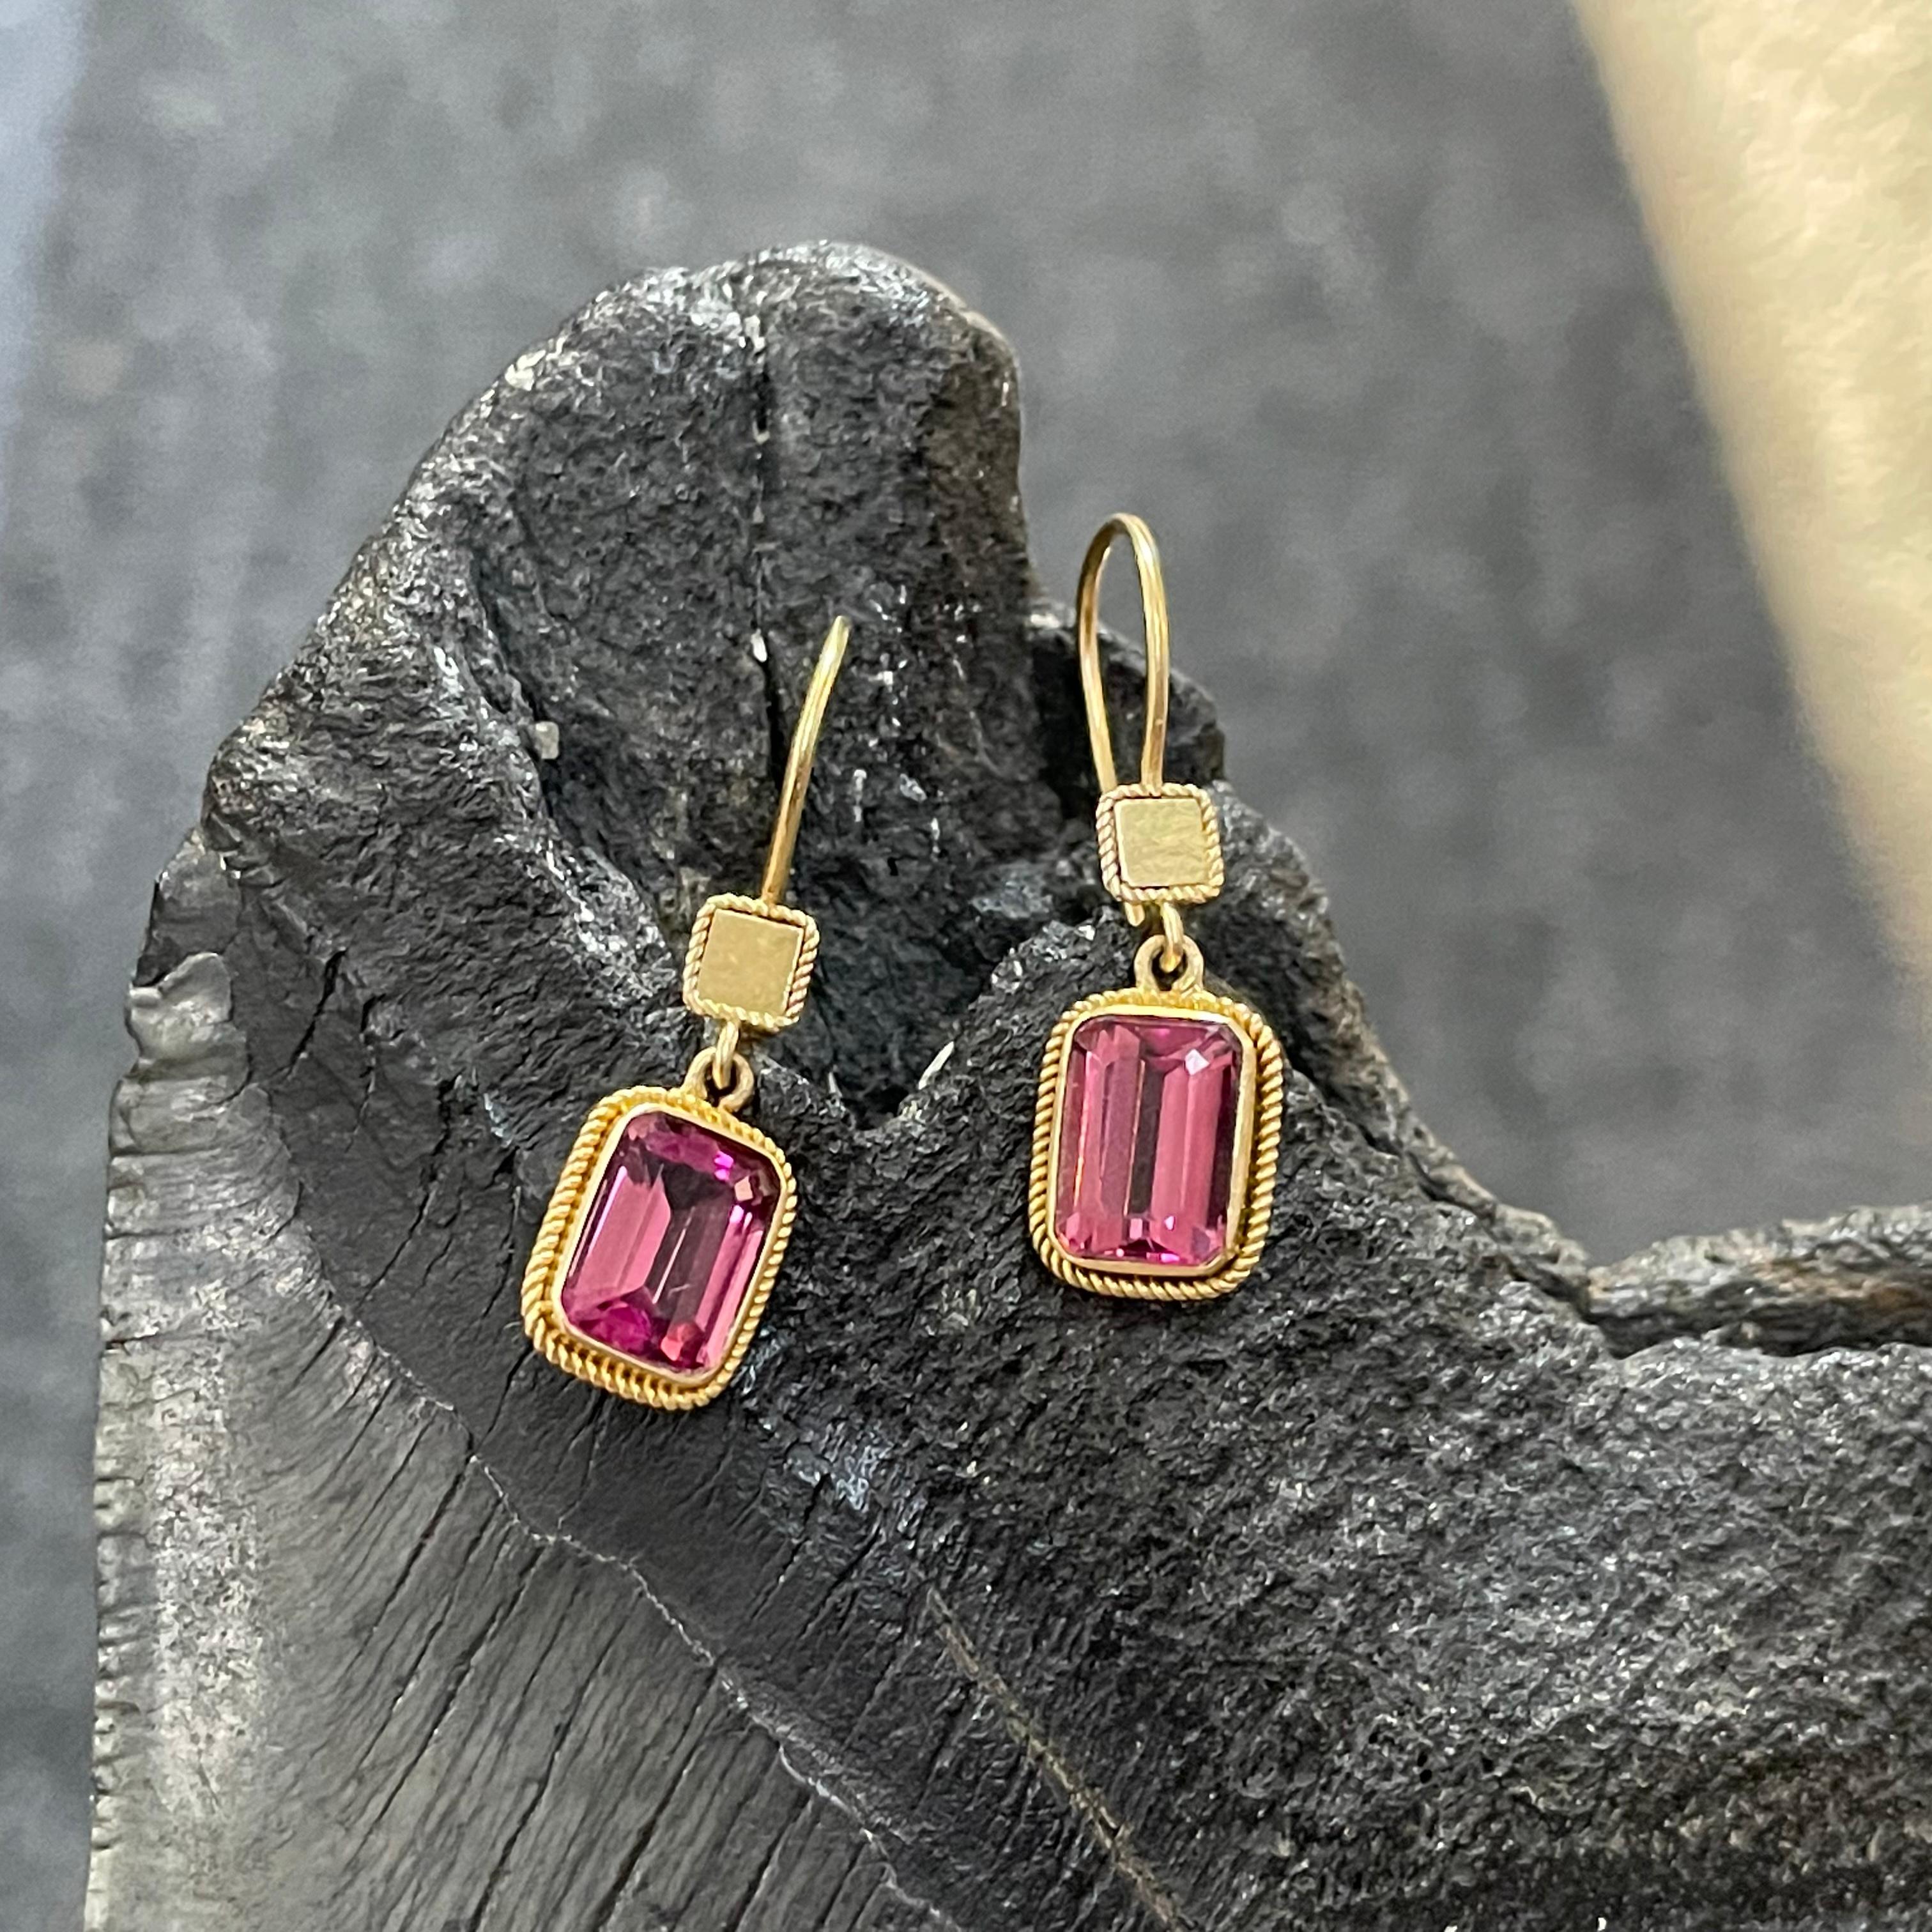 Two bright pink 6 x 8 mm octagonal cut tourmalines surrounded by twist wire accents dangle below similarly ornamented gold squares in this simple yet elegant design. Safety clasp wires.